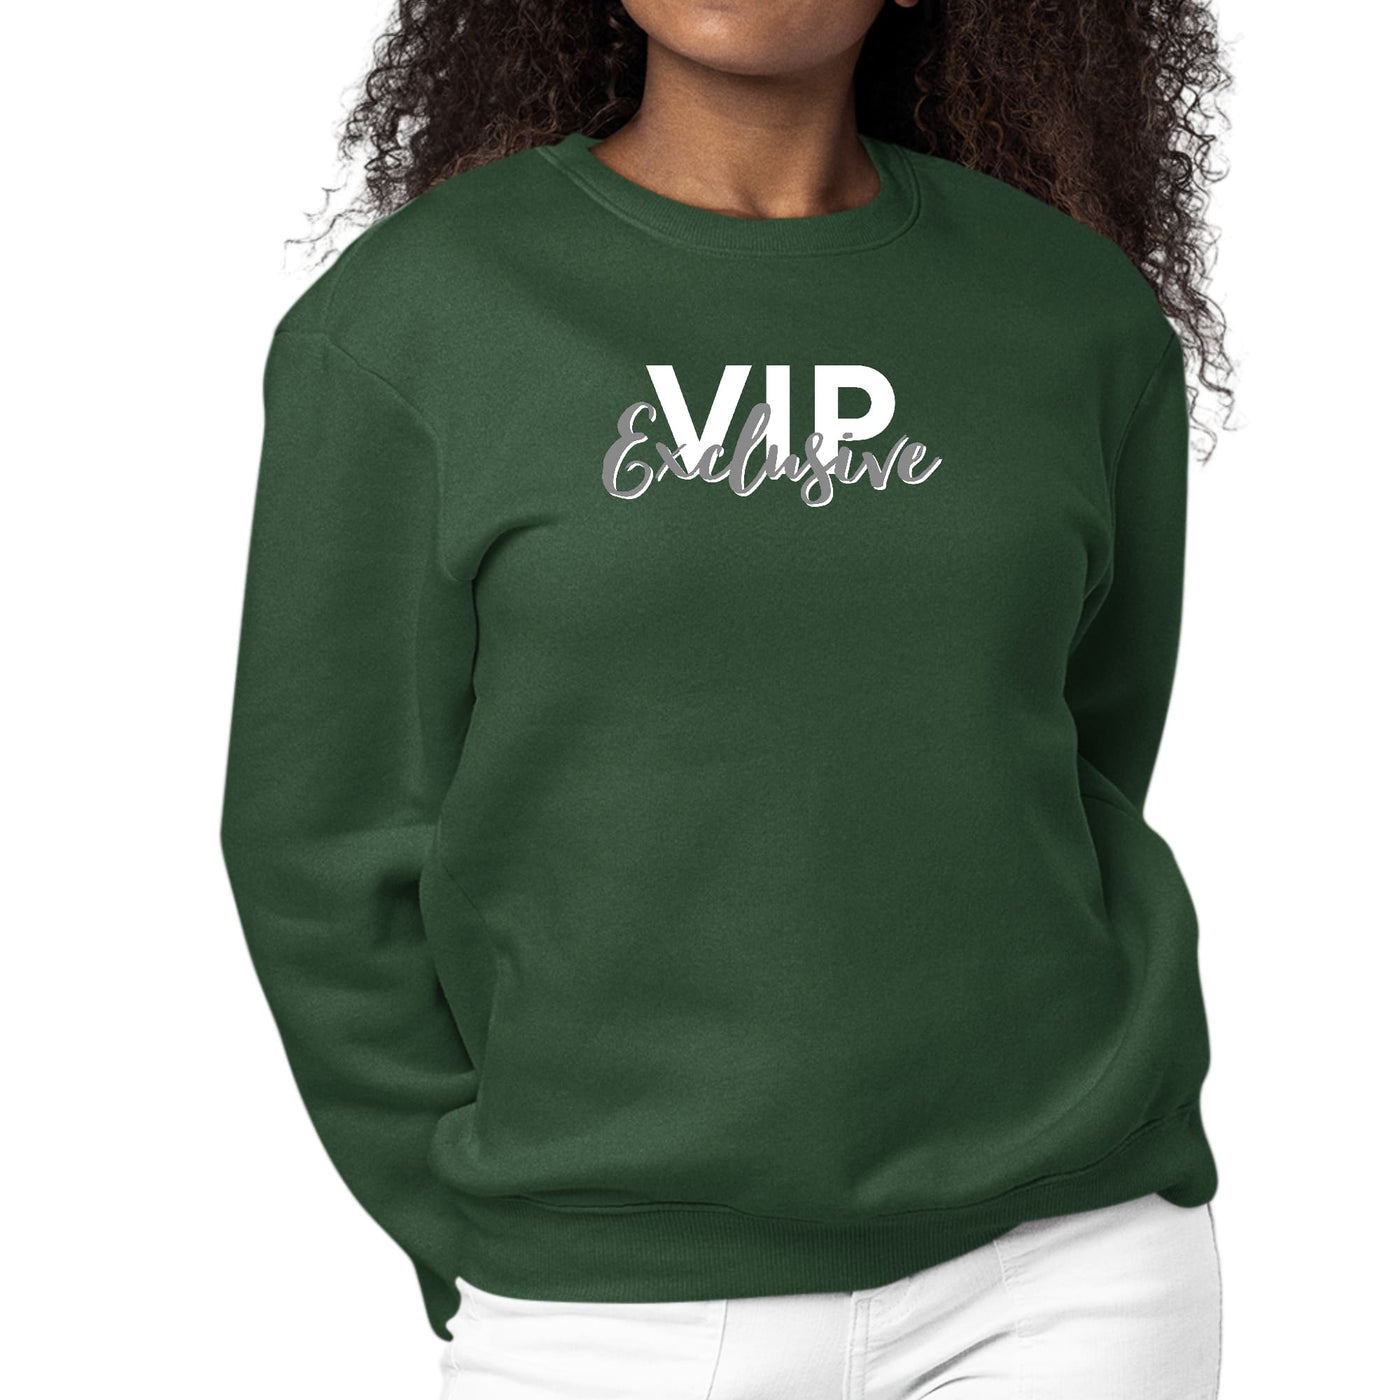 Womens Graphic Sweatshirt Vip Exclusive Grey And White - Affirmation - Womens